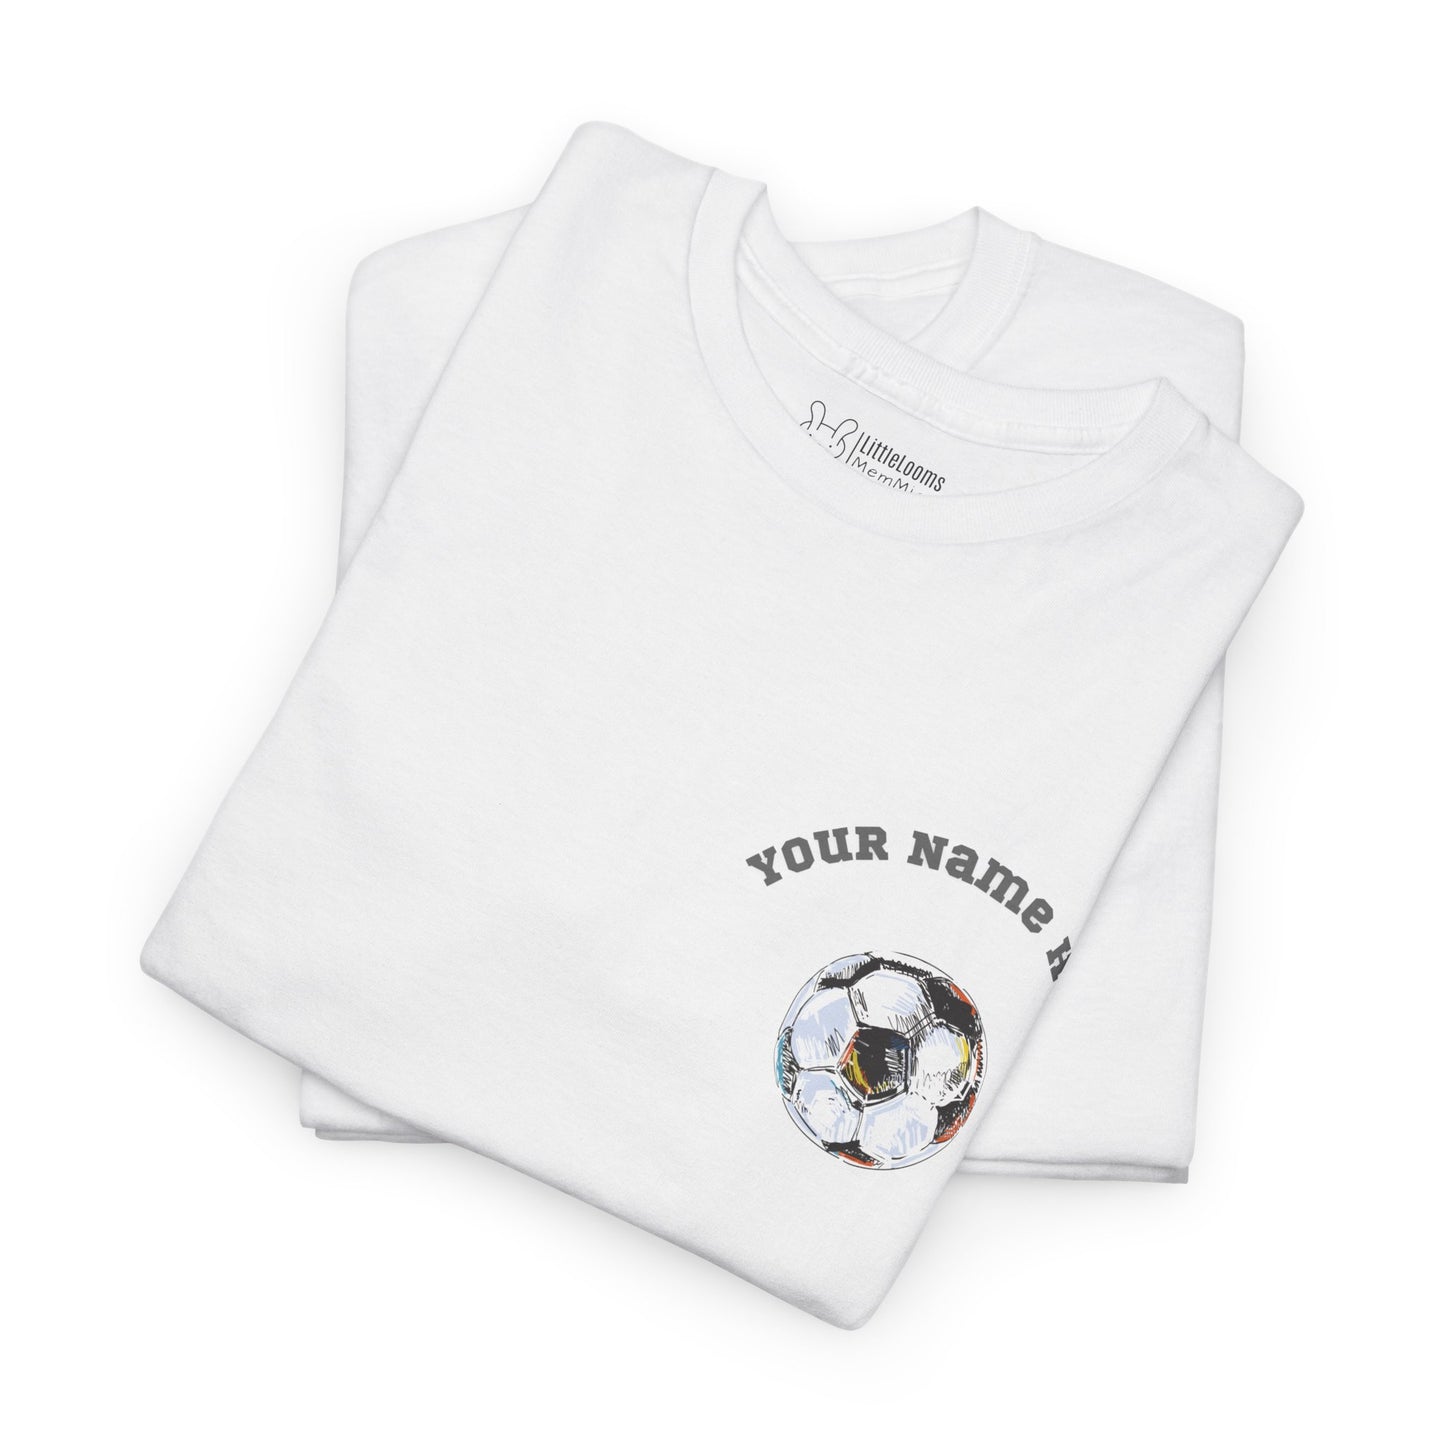 Customizable short-sleeved unisex t-shirt. Fultbo ball design and to personalize with a name.